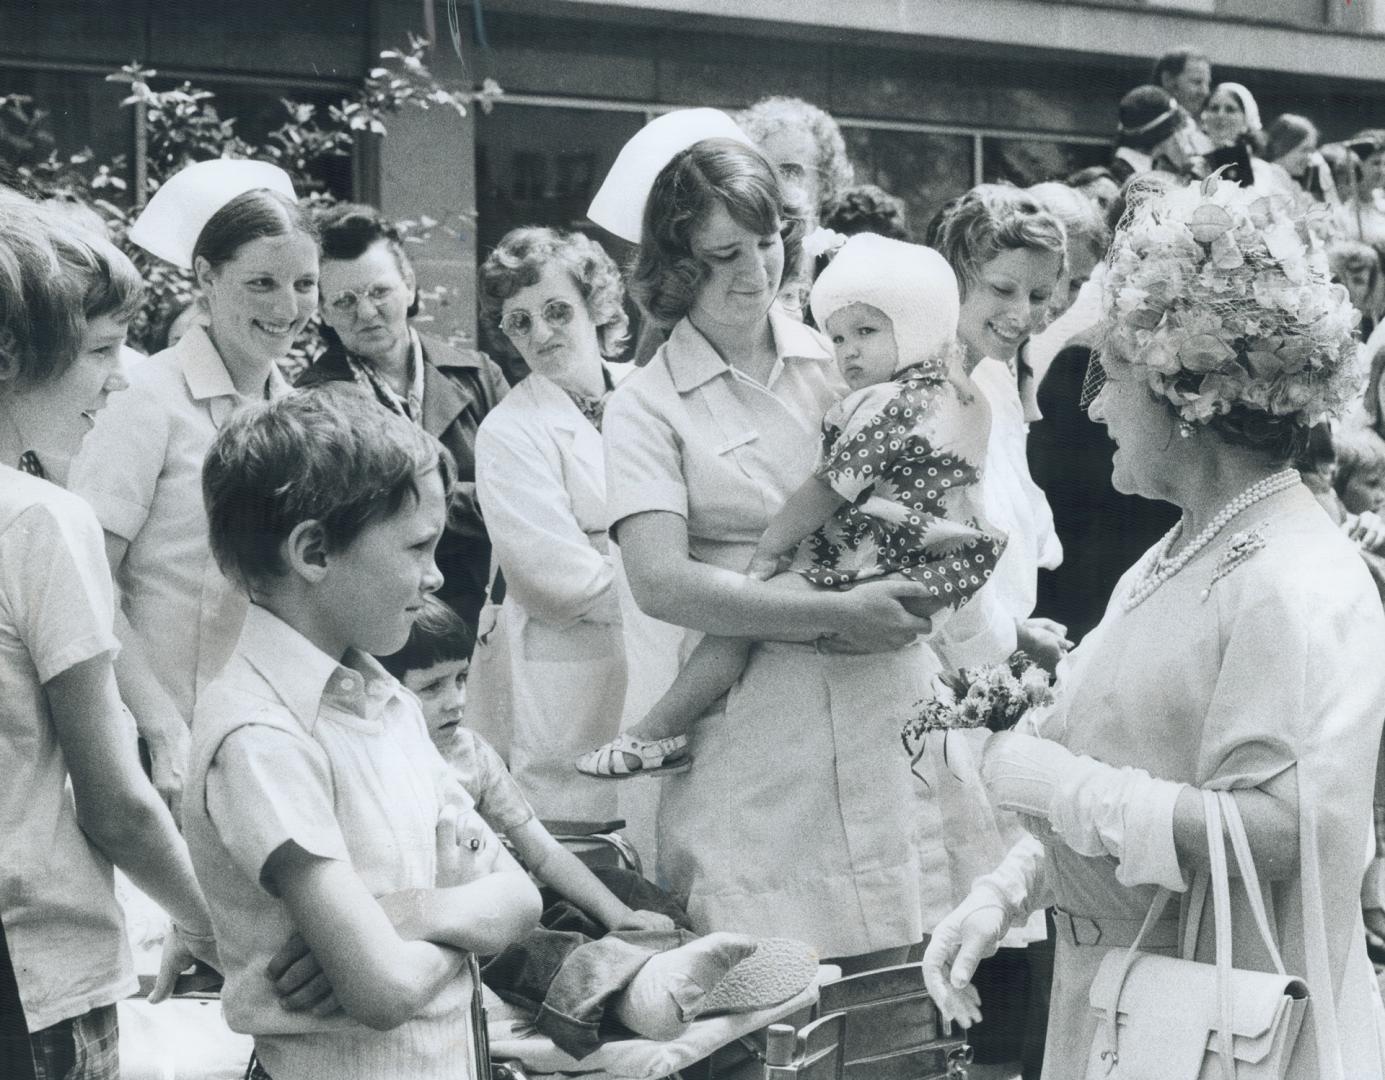 A Royal greeting for small patients: Wearing a lime green dress and matching hat, the Queen Mother greets crowd of nurses and patients out side Hospital for Sick Children today